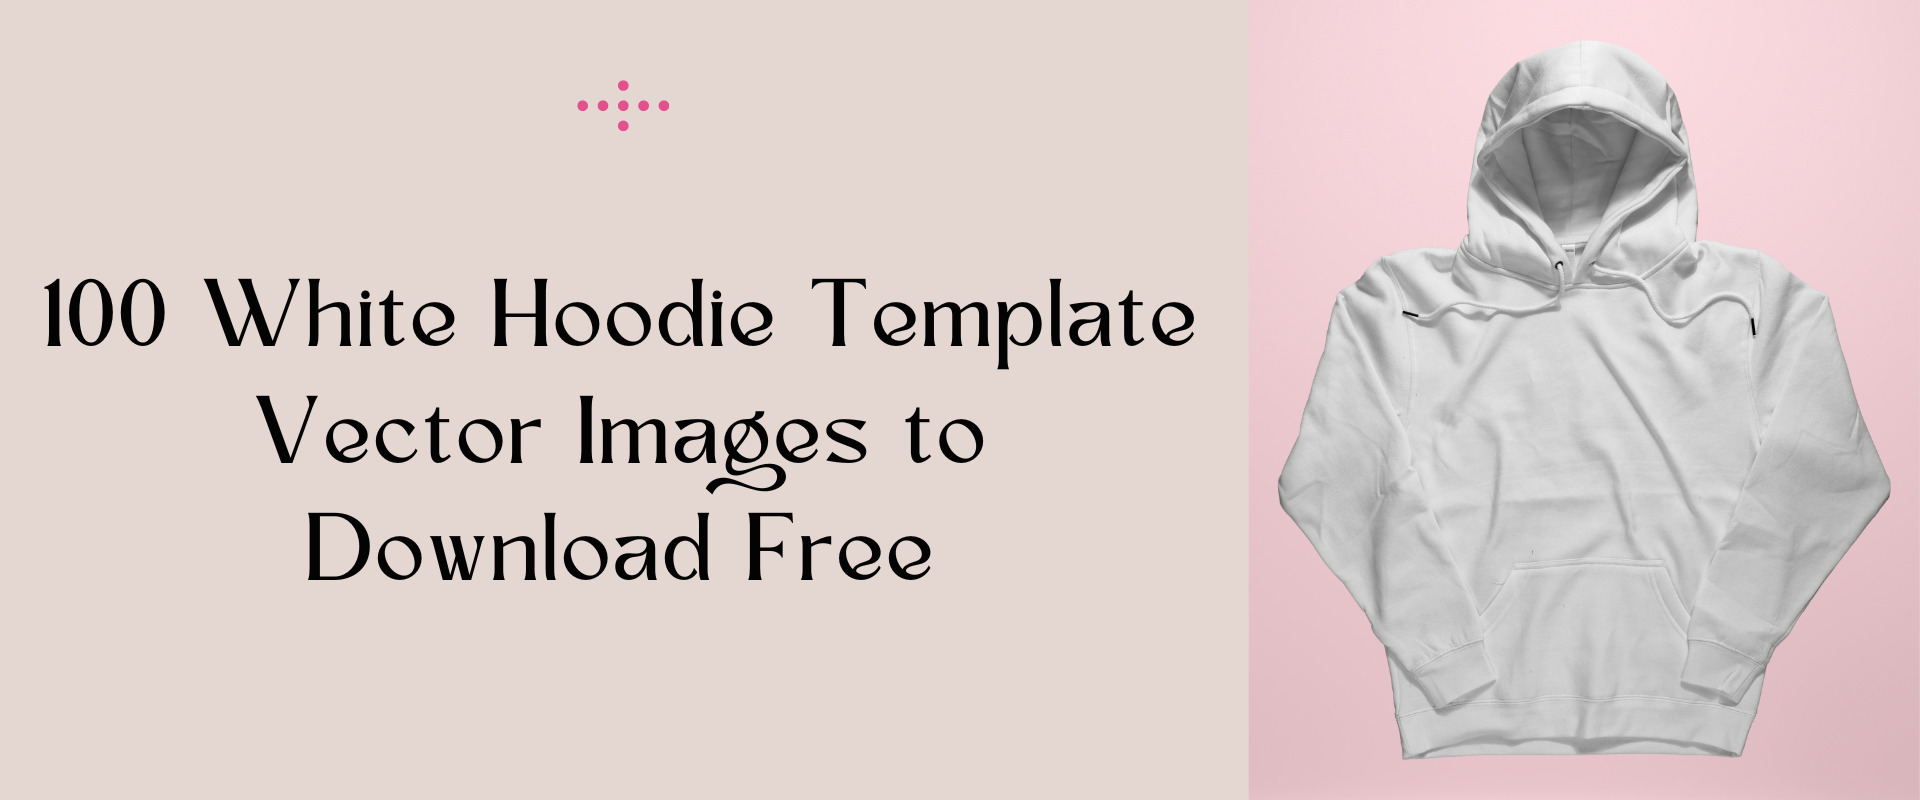 100 White Hoodie Template Vector Images to Download Free